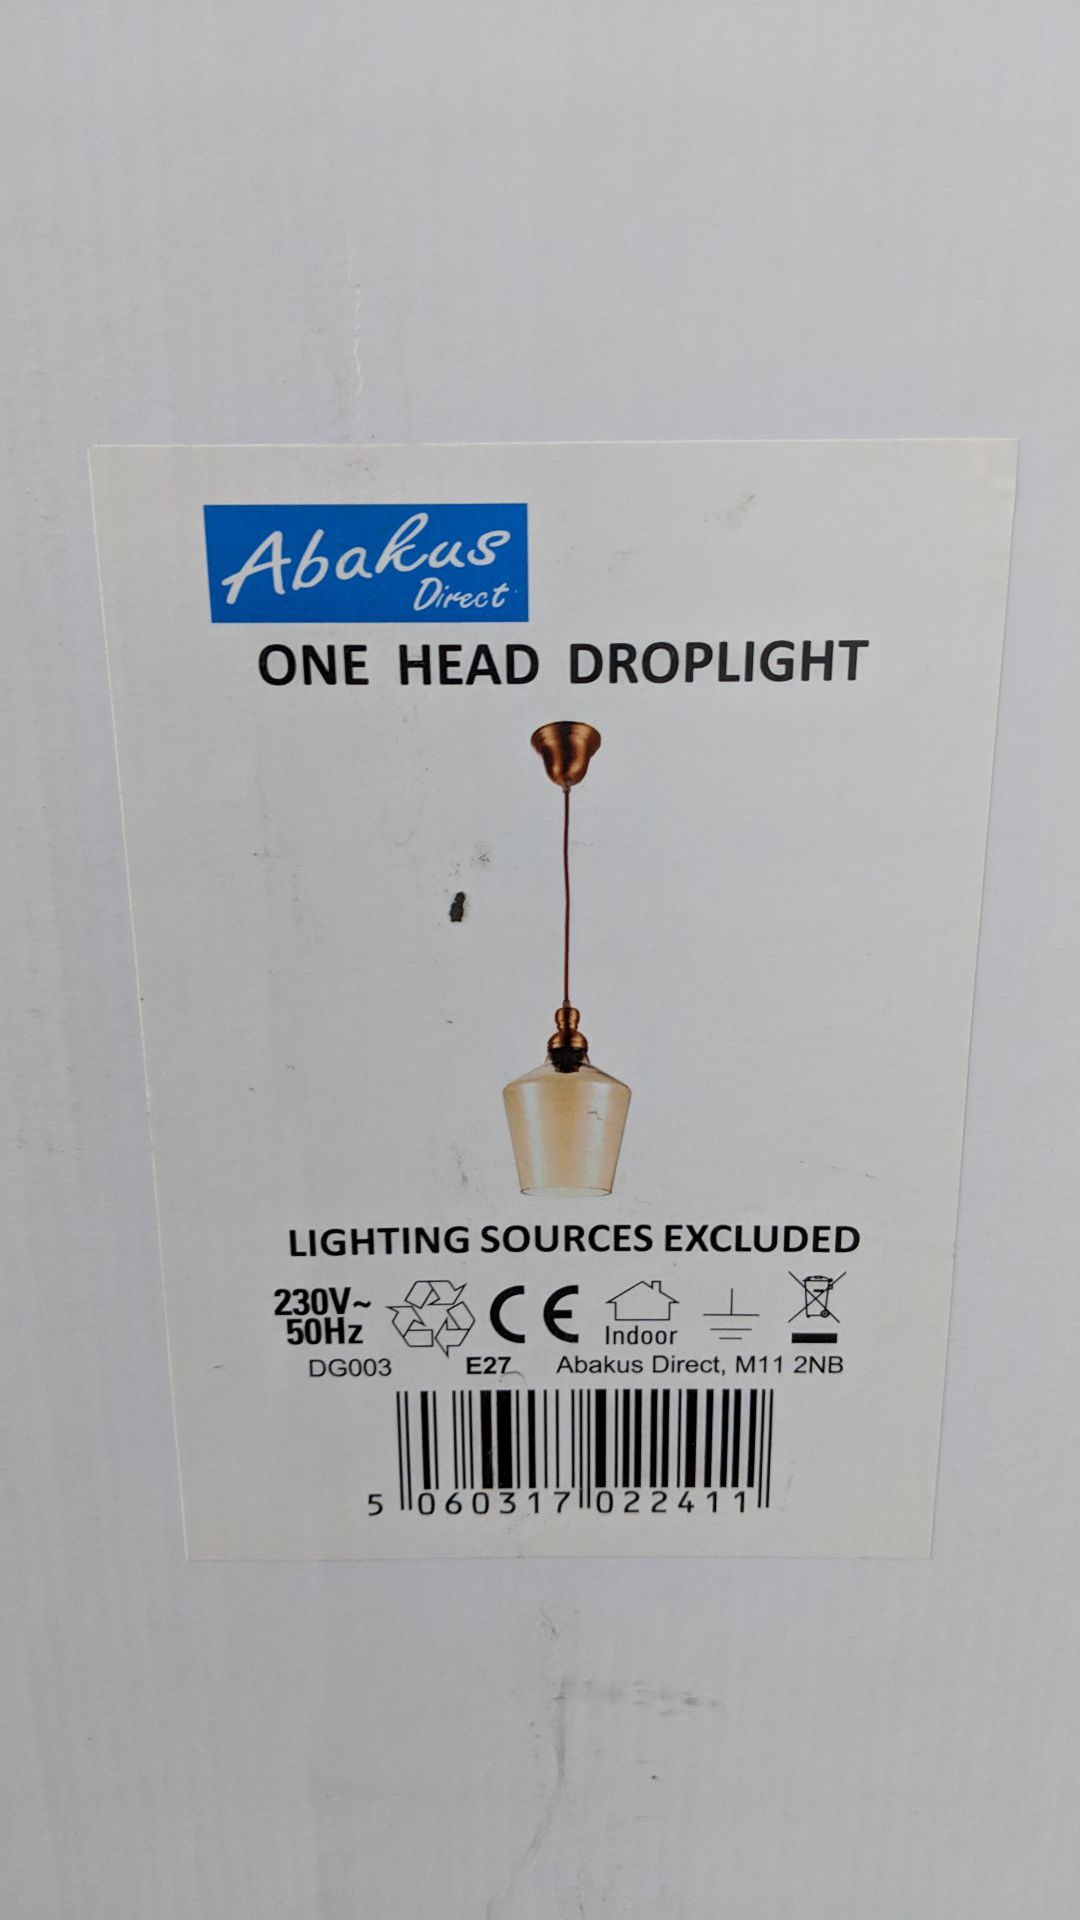 16 off Abakus model DG003 one head droplight light fittings This lot is one of a number of lots in - Image 3 of 3